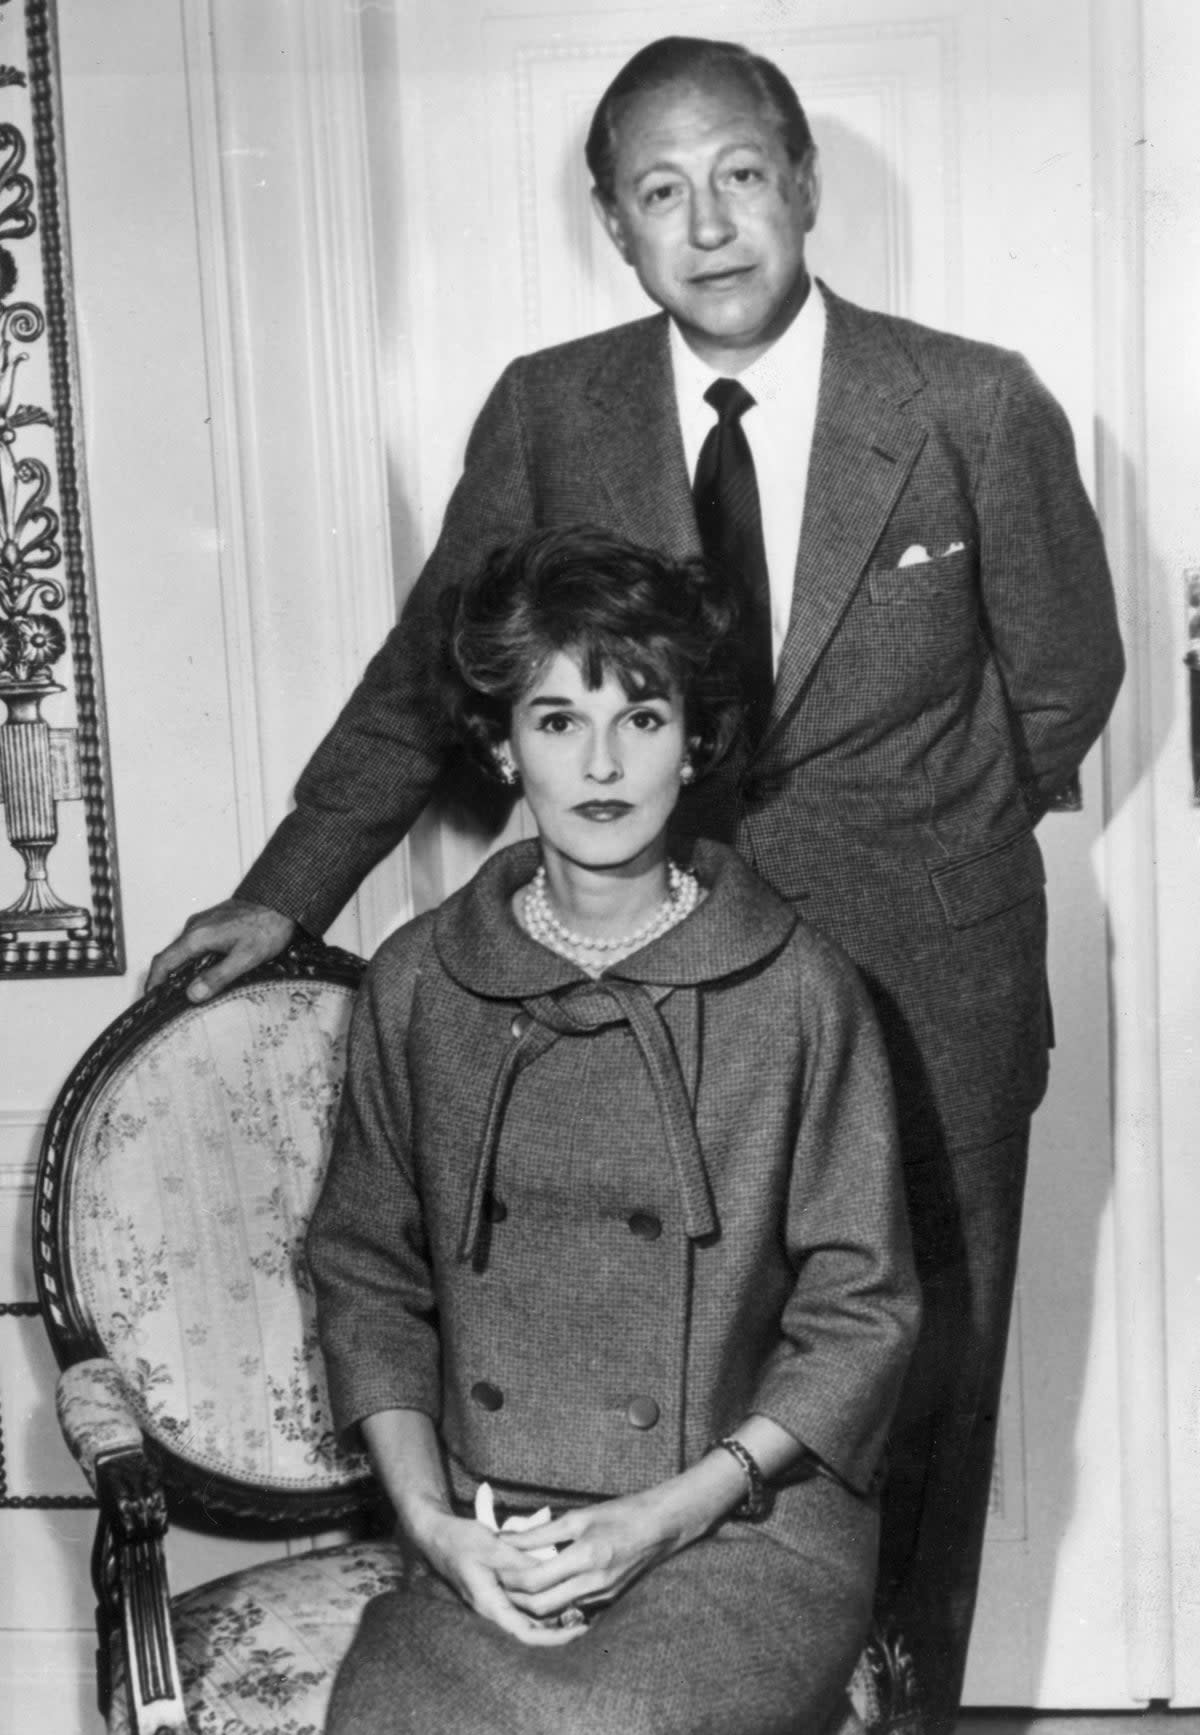 High society: Capote described Babe Paley, pictured with husband Bill, as “the most beautiful woman of the 20th century